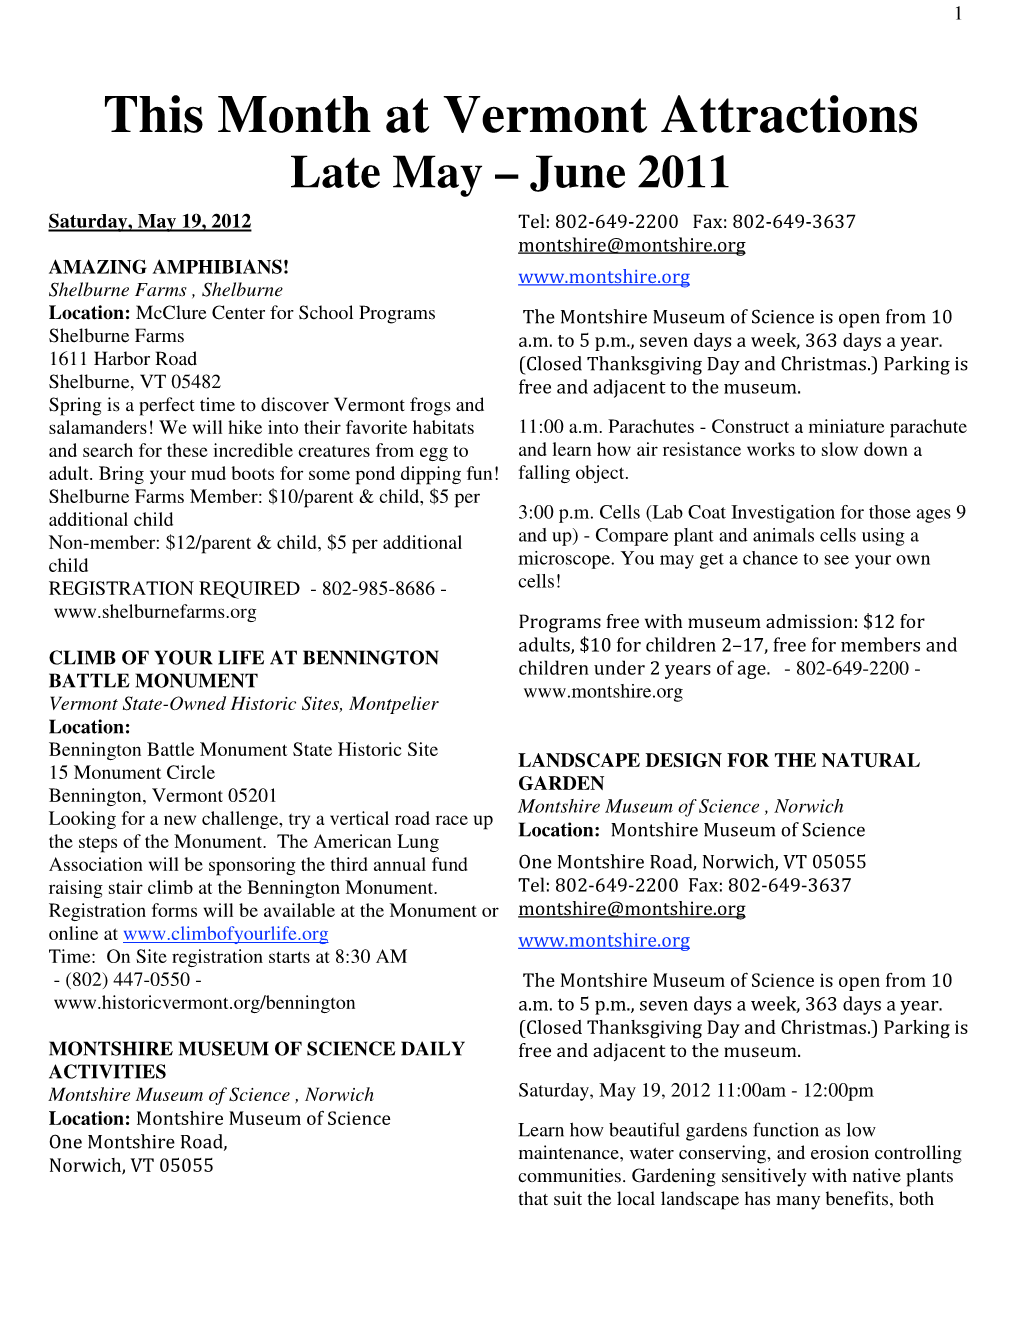 This Month at Vermont Attractions Late May – June 2011